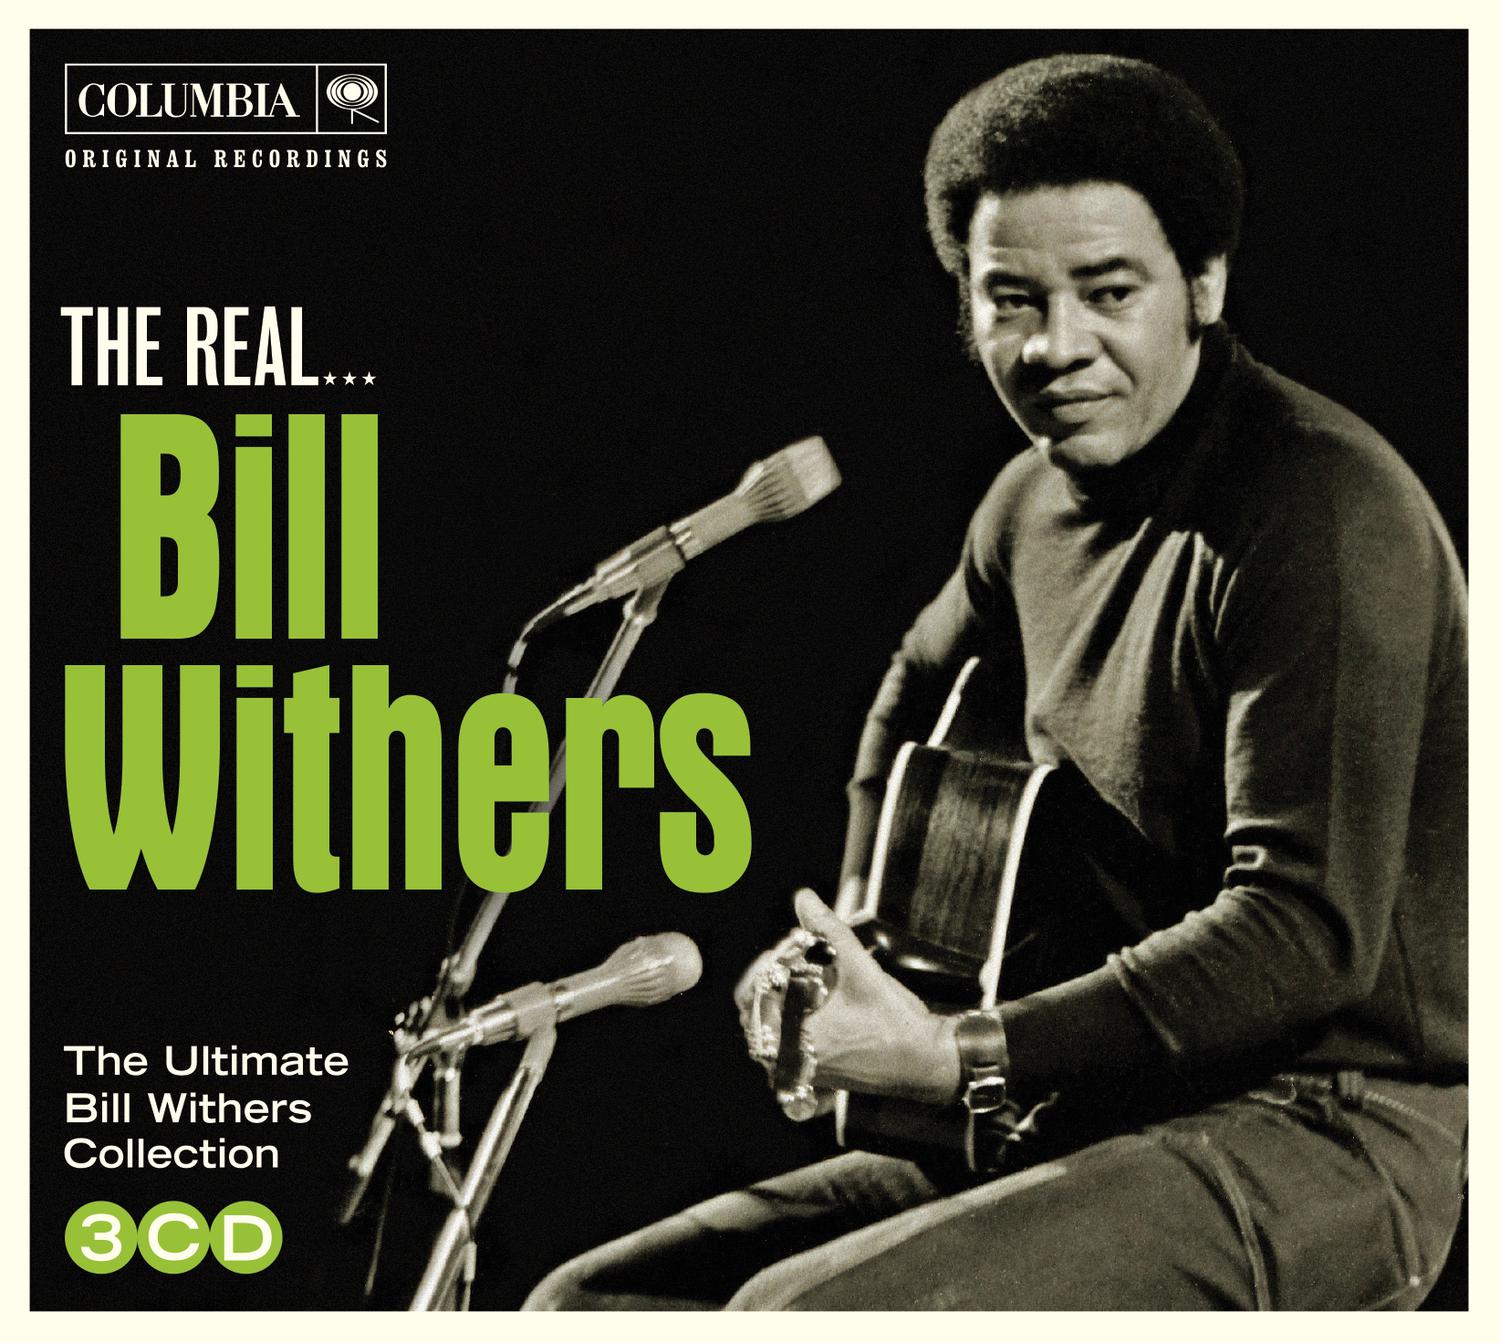 The Real Bill Withers